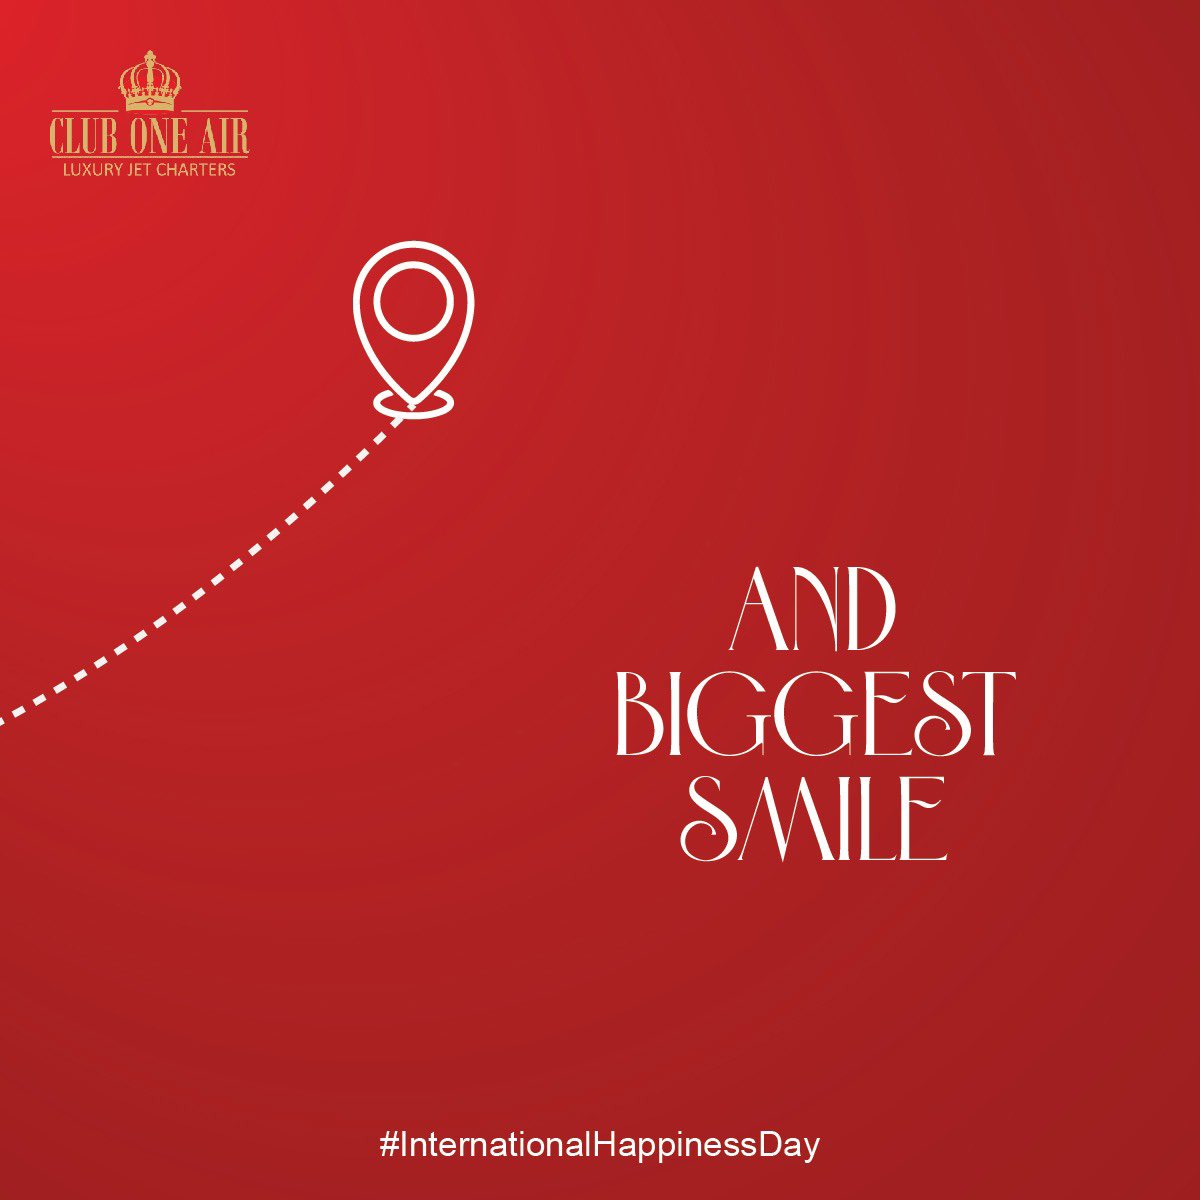 Winging you to wonderlands that stretches your smile from one exotic location to the next! 
Wishing a Happy #InternationalDayofHappiness to all! 

#HappinessDay #ClubOneAir #PrivateJet #CharterServices #Travel #Aviation #PrivateAirline #HappyInternationalDayOfHappiness